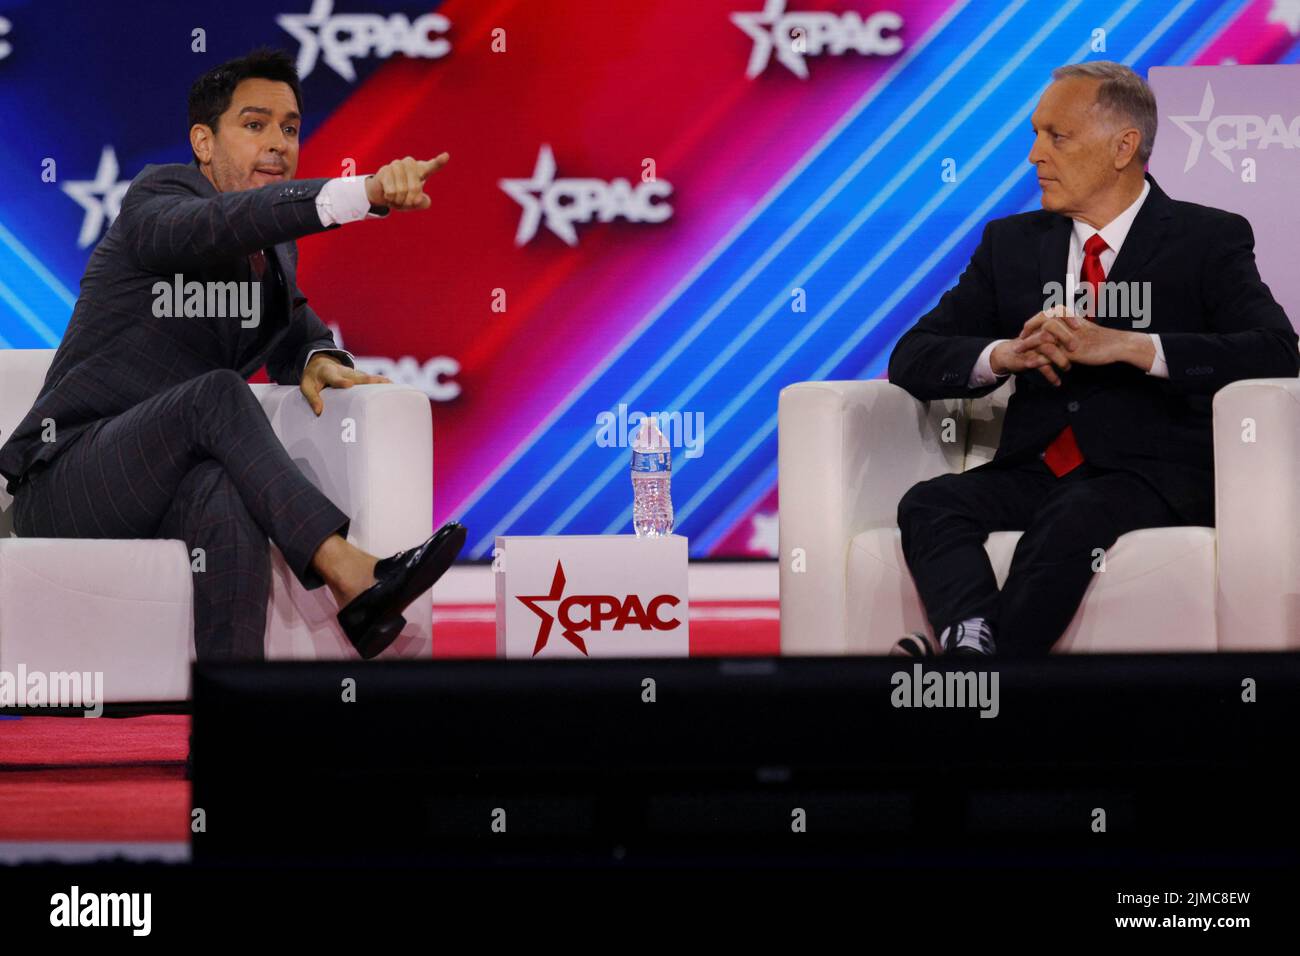 U.S. Representative Andy Biggs (R-AZ) listens as Brandon Straka, who founded #WalkAway and was convicted on charges linked to the January 6 attacks on the U.S. Capitol, speaks at the Conservative Political Action Conference (CPAC) in Dallas, Texas, U.S., August 5, 2022.  REUTERS/Brian Snyder Stock Photo